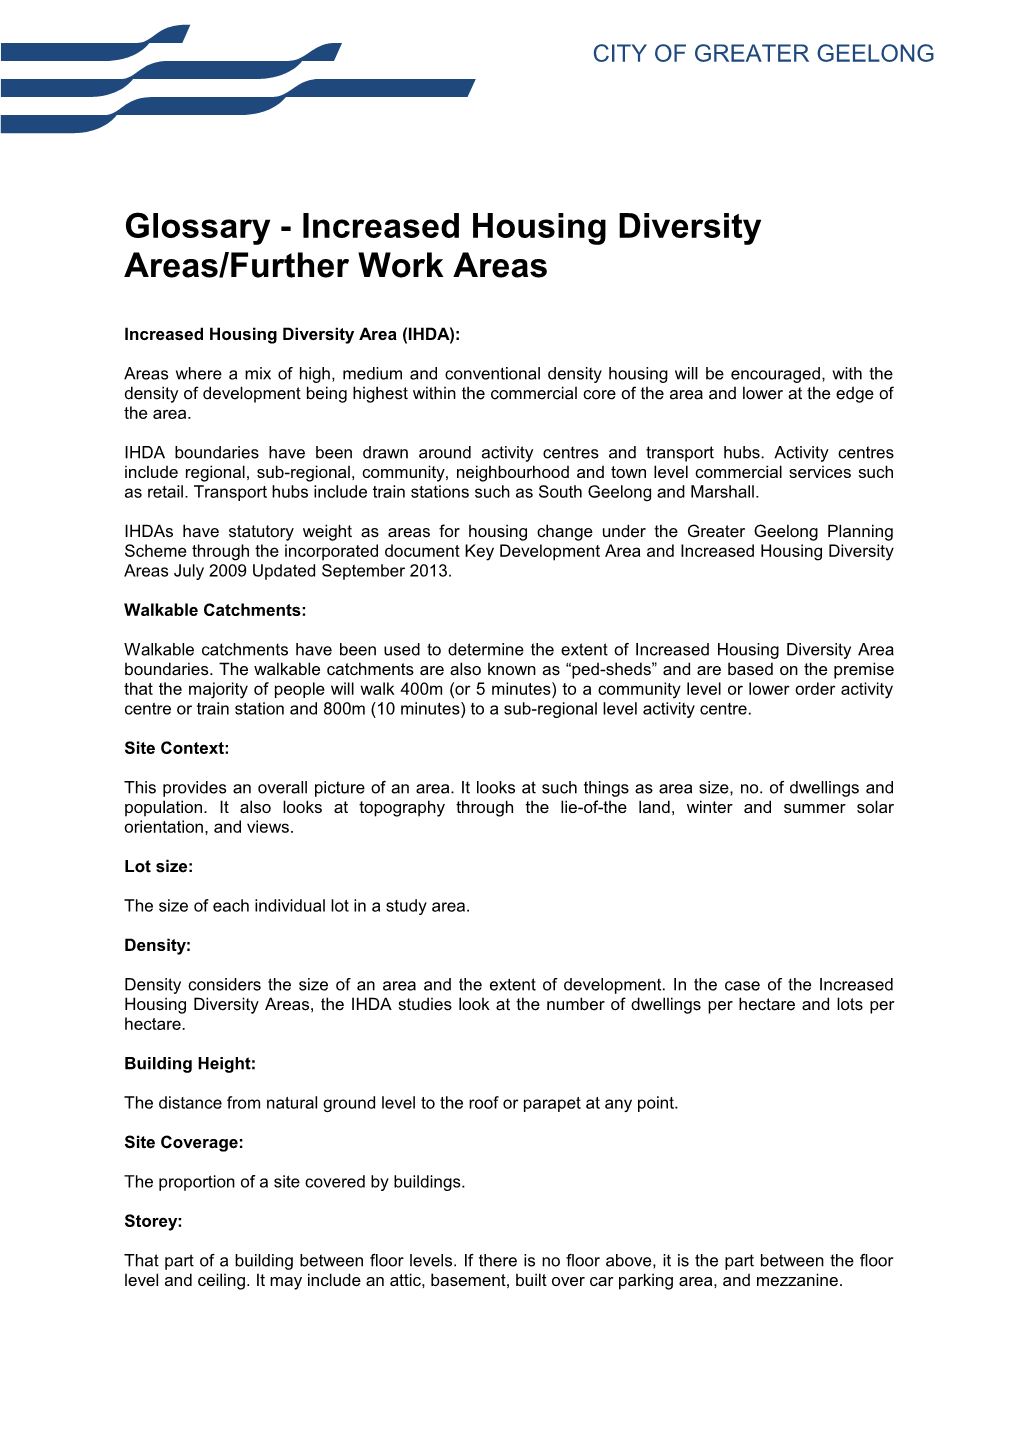 Glossary - Increased Housing Diversity Areas/Further Work Areas